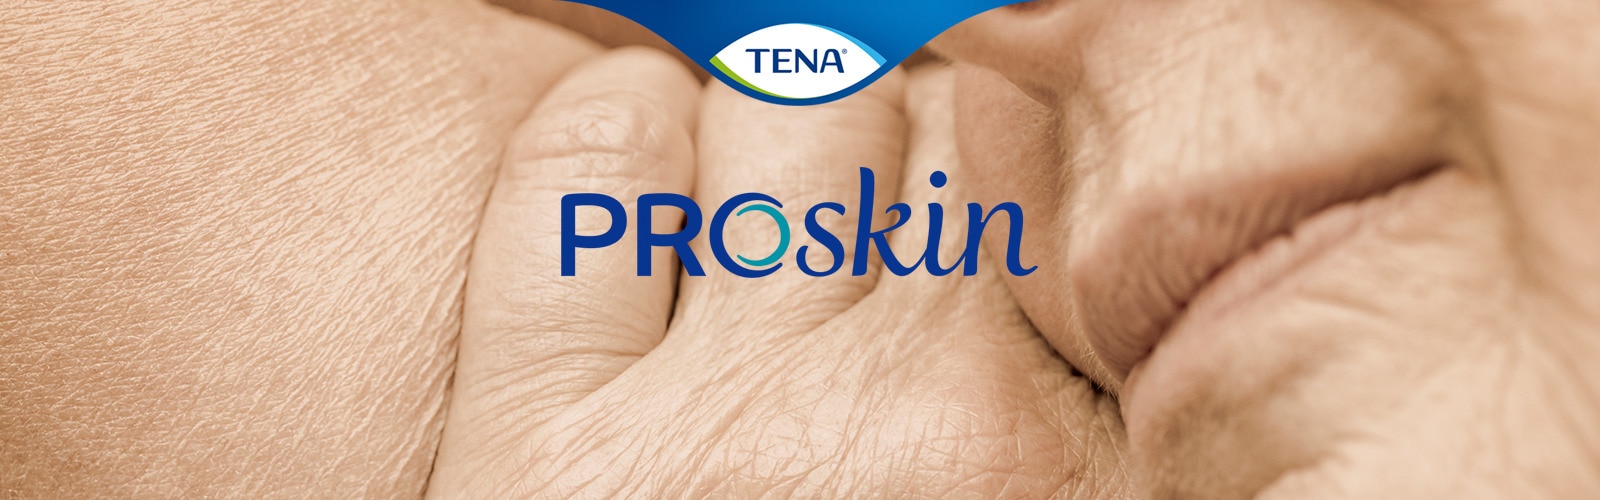 TENA ProSkin Brings Incontinence Care and Skin Health Together